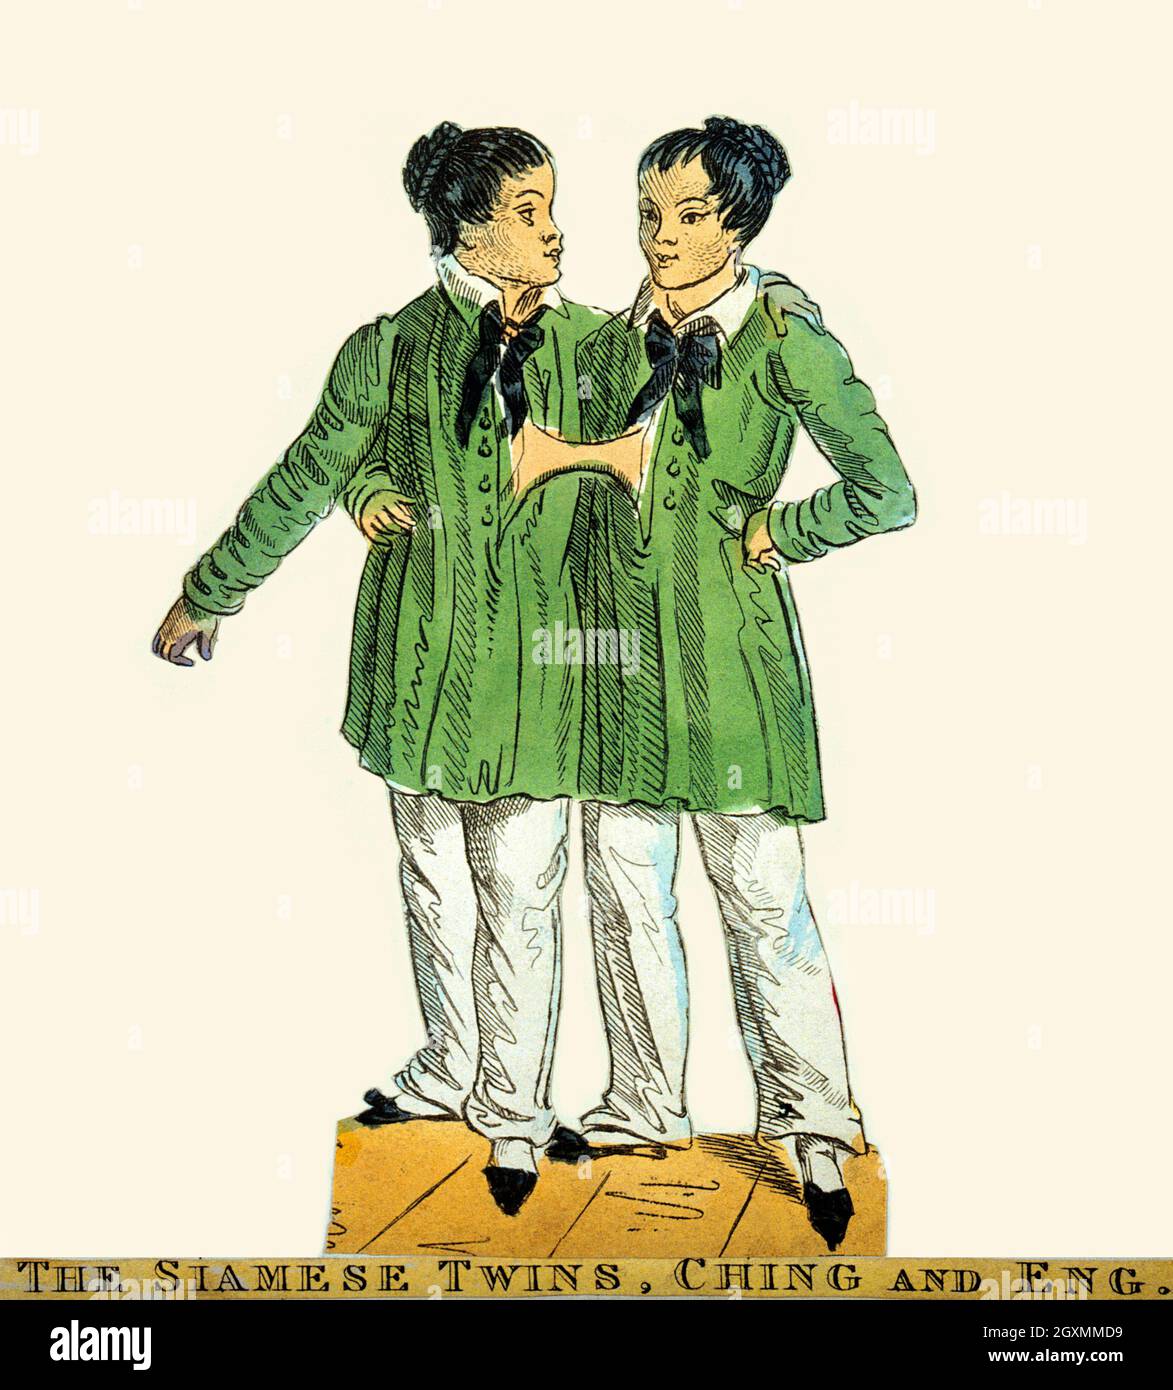 The Siamese Twins, Chang and Eng Stock Photo